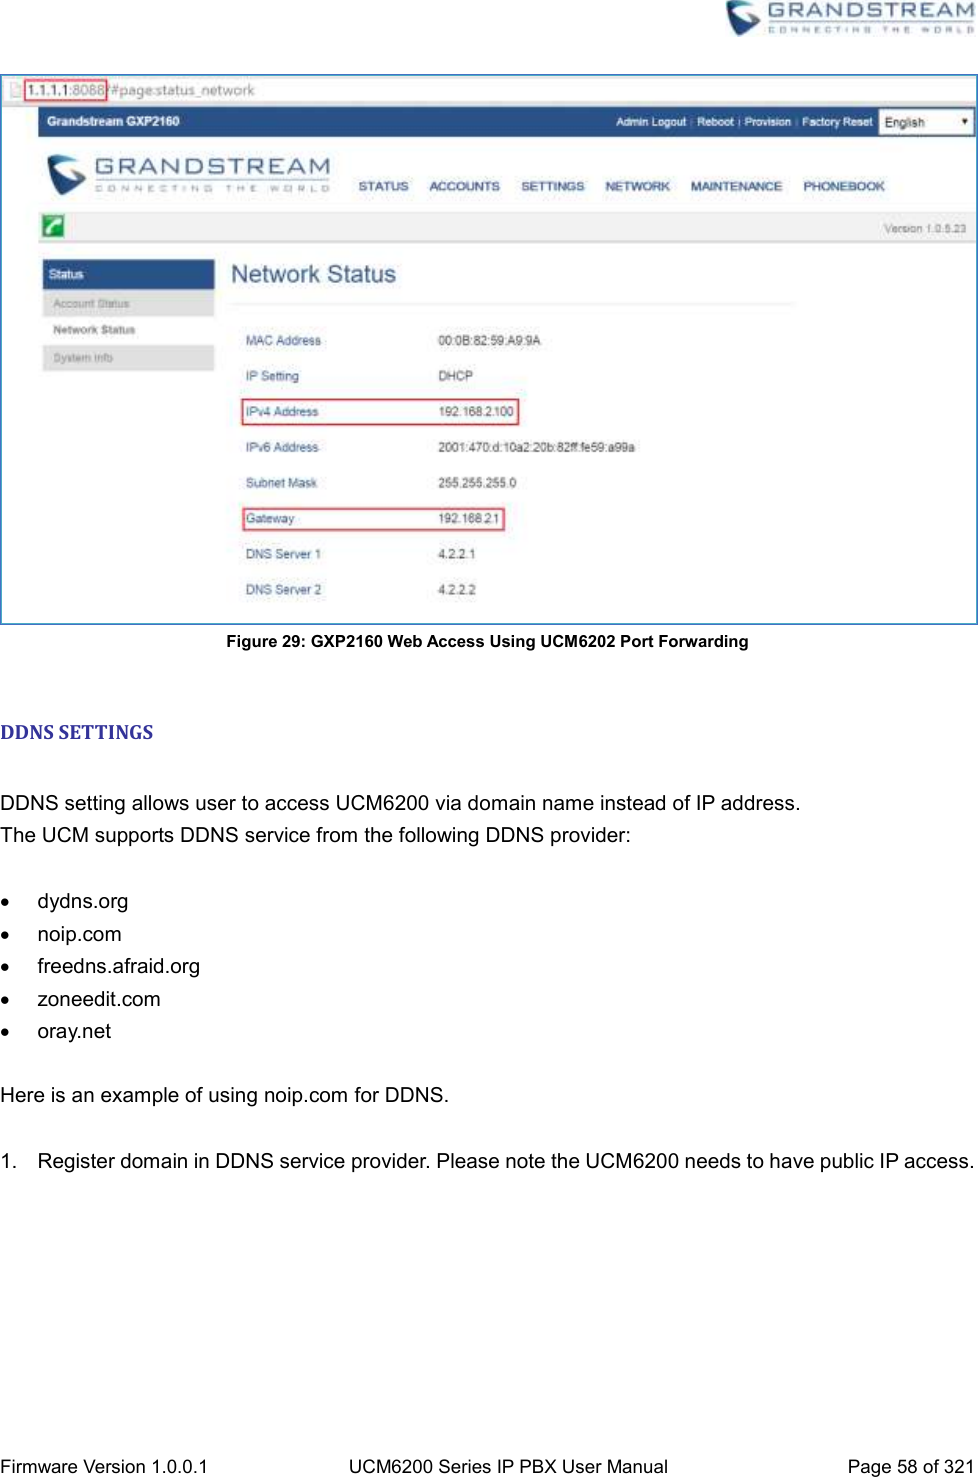  Firmware Version 1.0.0.1 UCM6200 Series IP PBX User Manual Page 58 of 321     Figure 29: GXP2160 Web Access Using UCM6202 Port Forwarding  DDNS SETTINGS  DDNS setting allows user to access UCM6200 via domain name instead of IP address.   The UCM supports DDNS service from the following DDNS provider:    dydns.org   noip.com   freedns.afraid.org   zoneedit.com   oray.net  Here is an example of using noip.com for DDNS.  1.  Register domain in DDNS service provider. Please note the UCM6200 needs to have public IP access. 